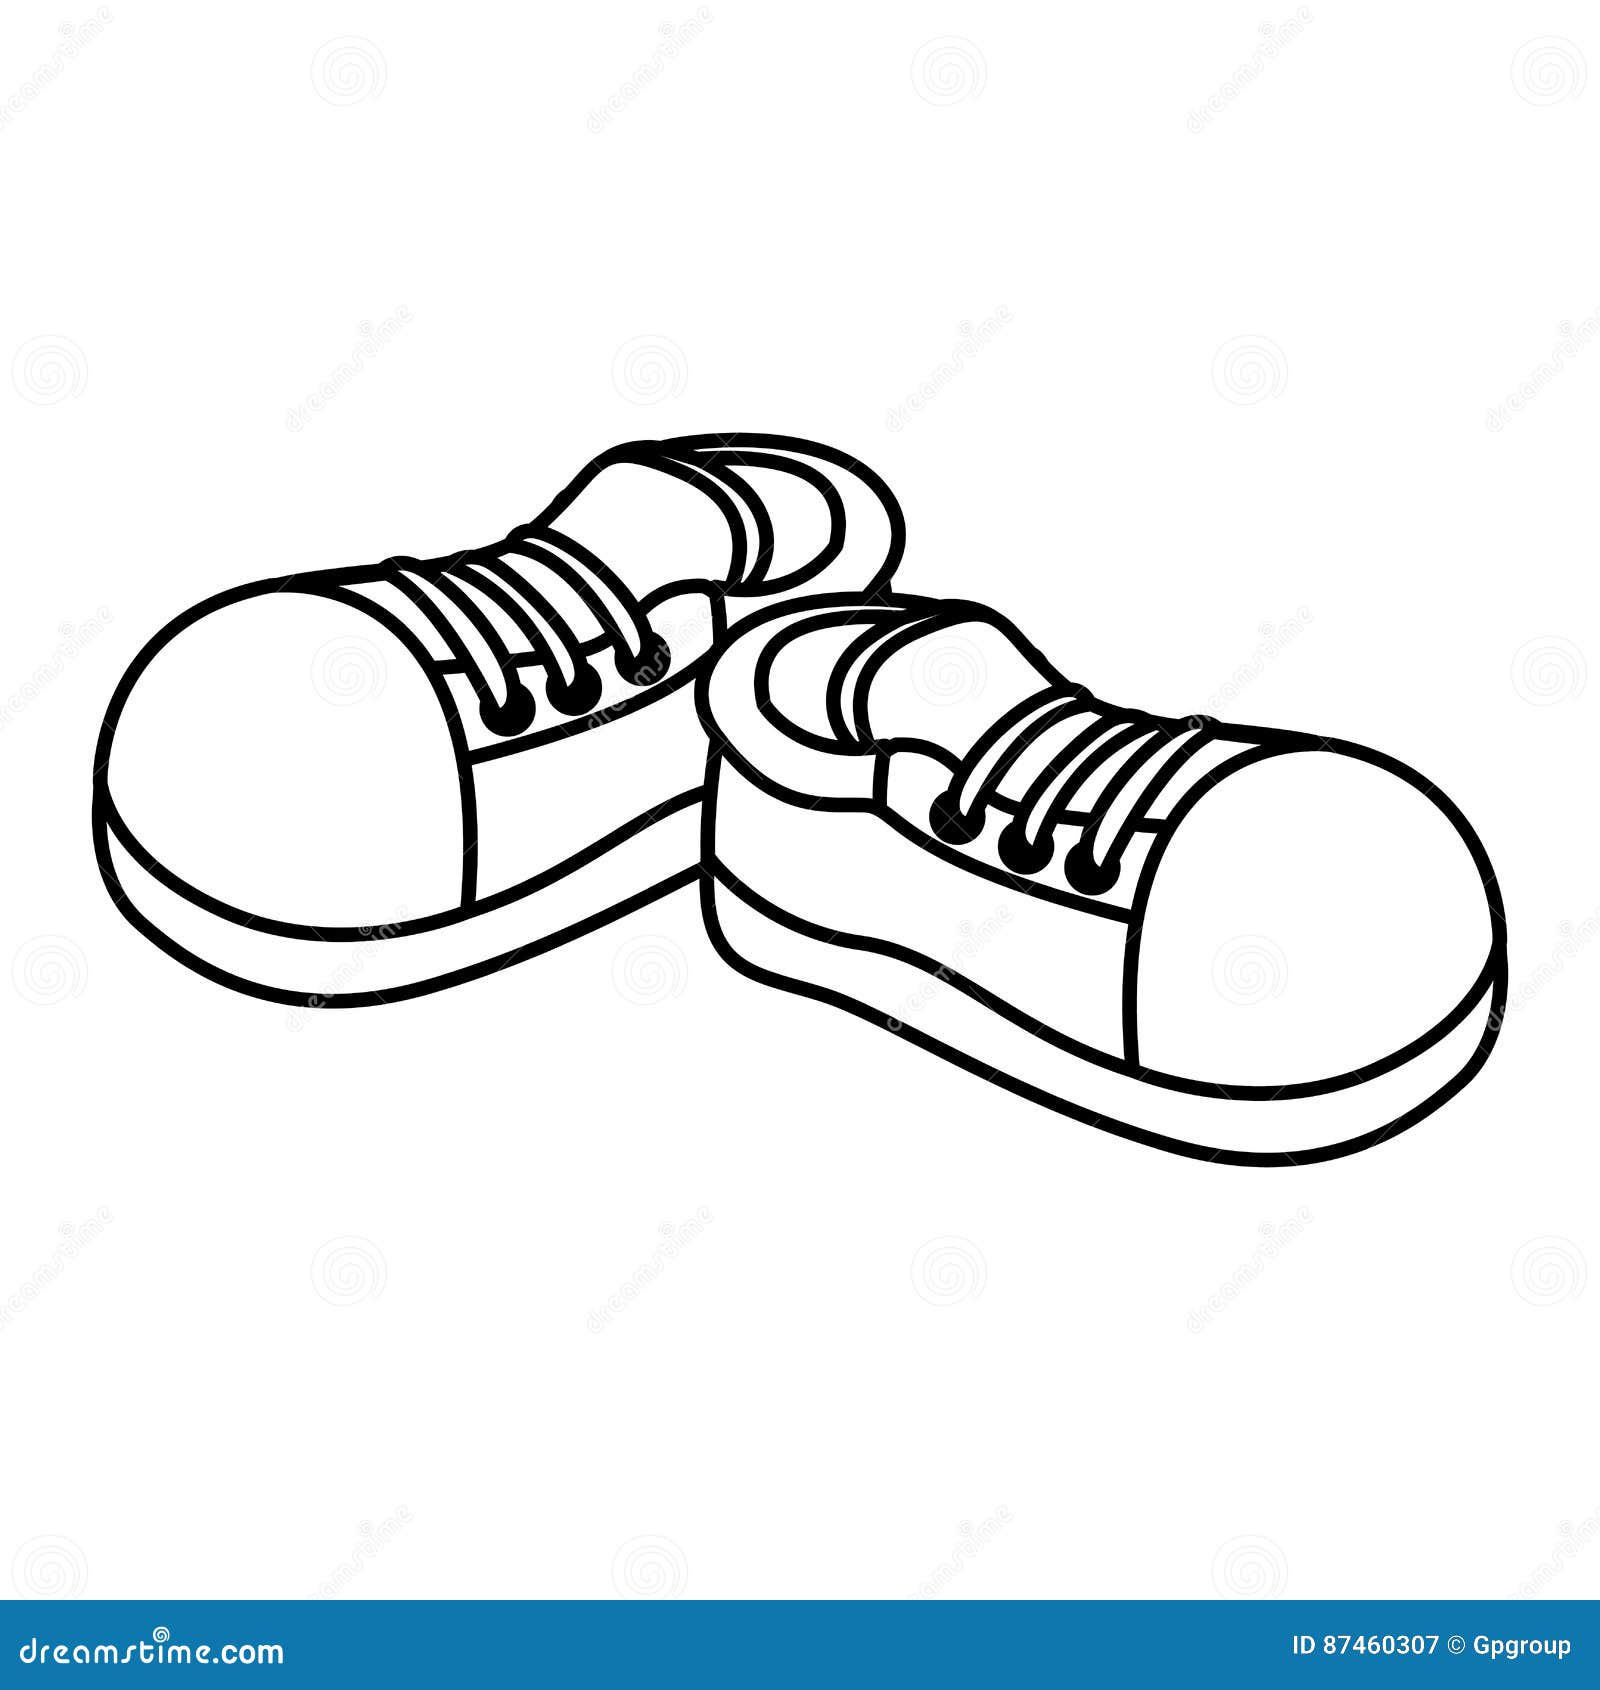 Monochrome Contour with Pair of Sport Shoes Stock Illustration ...